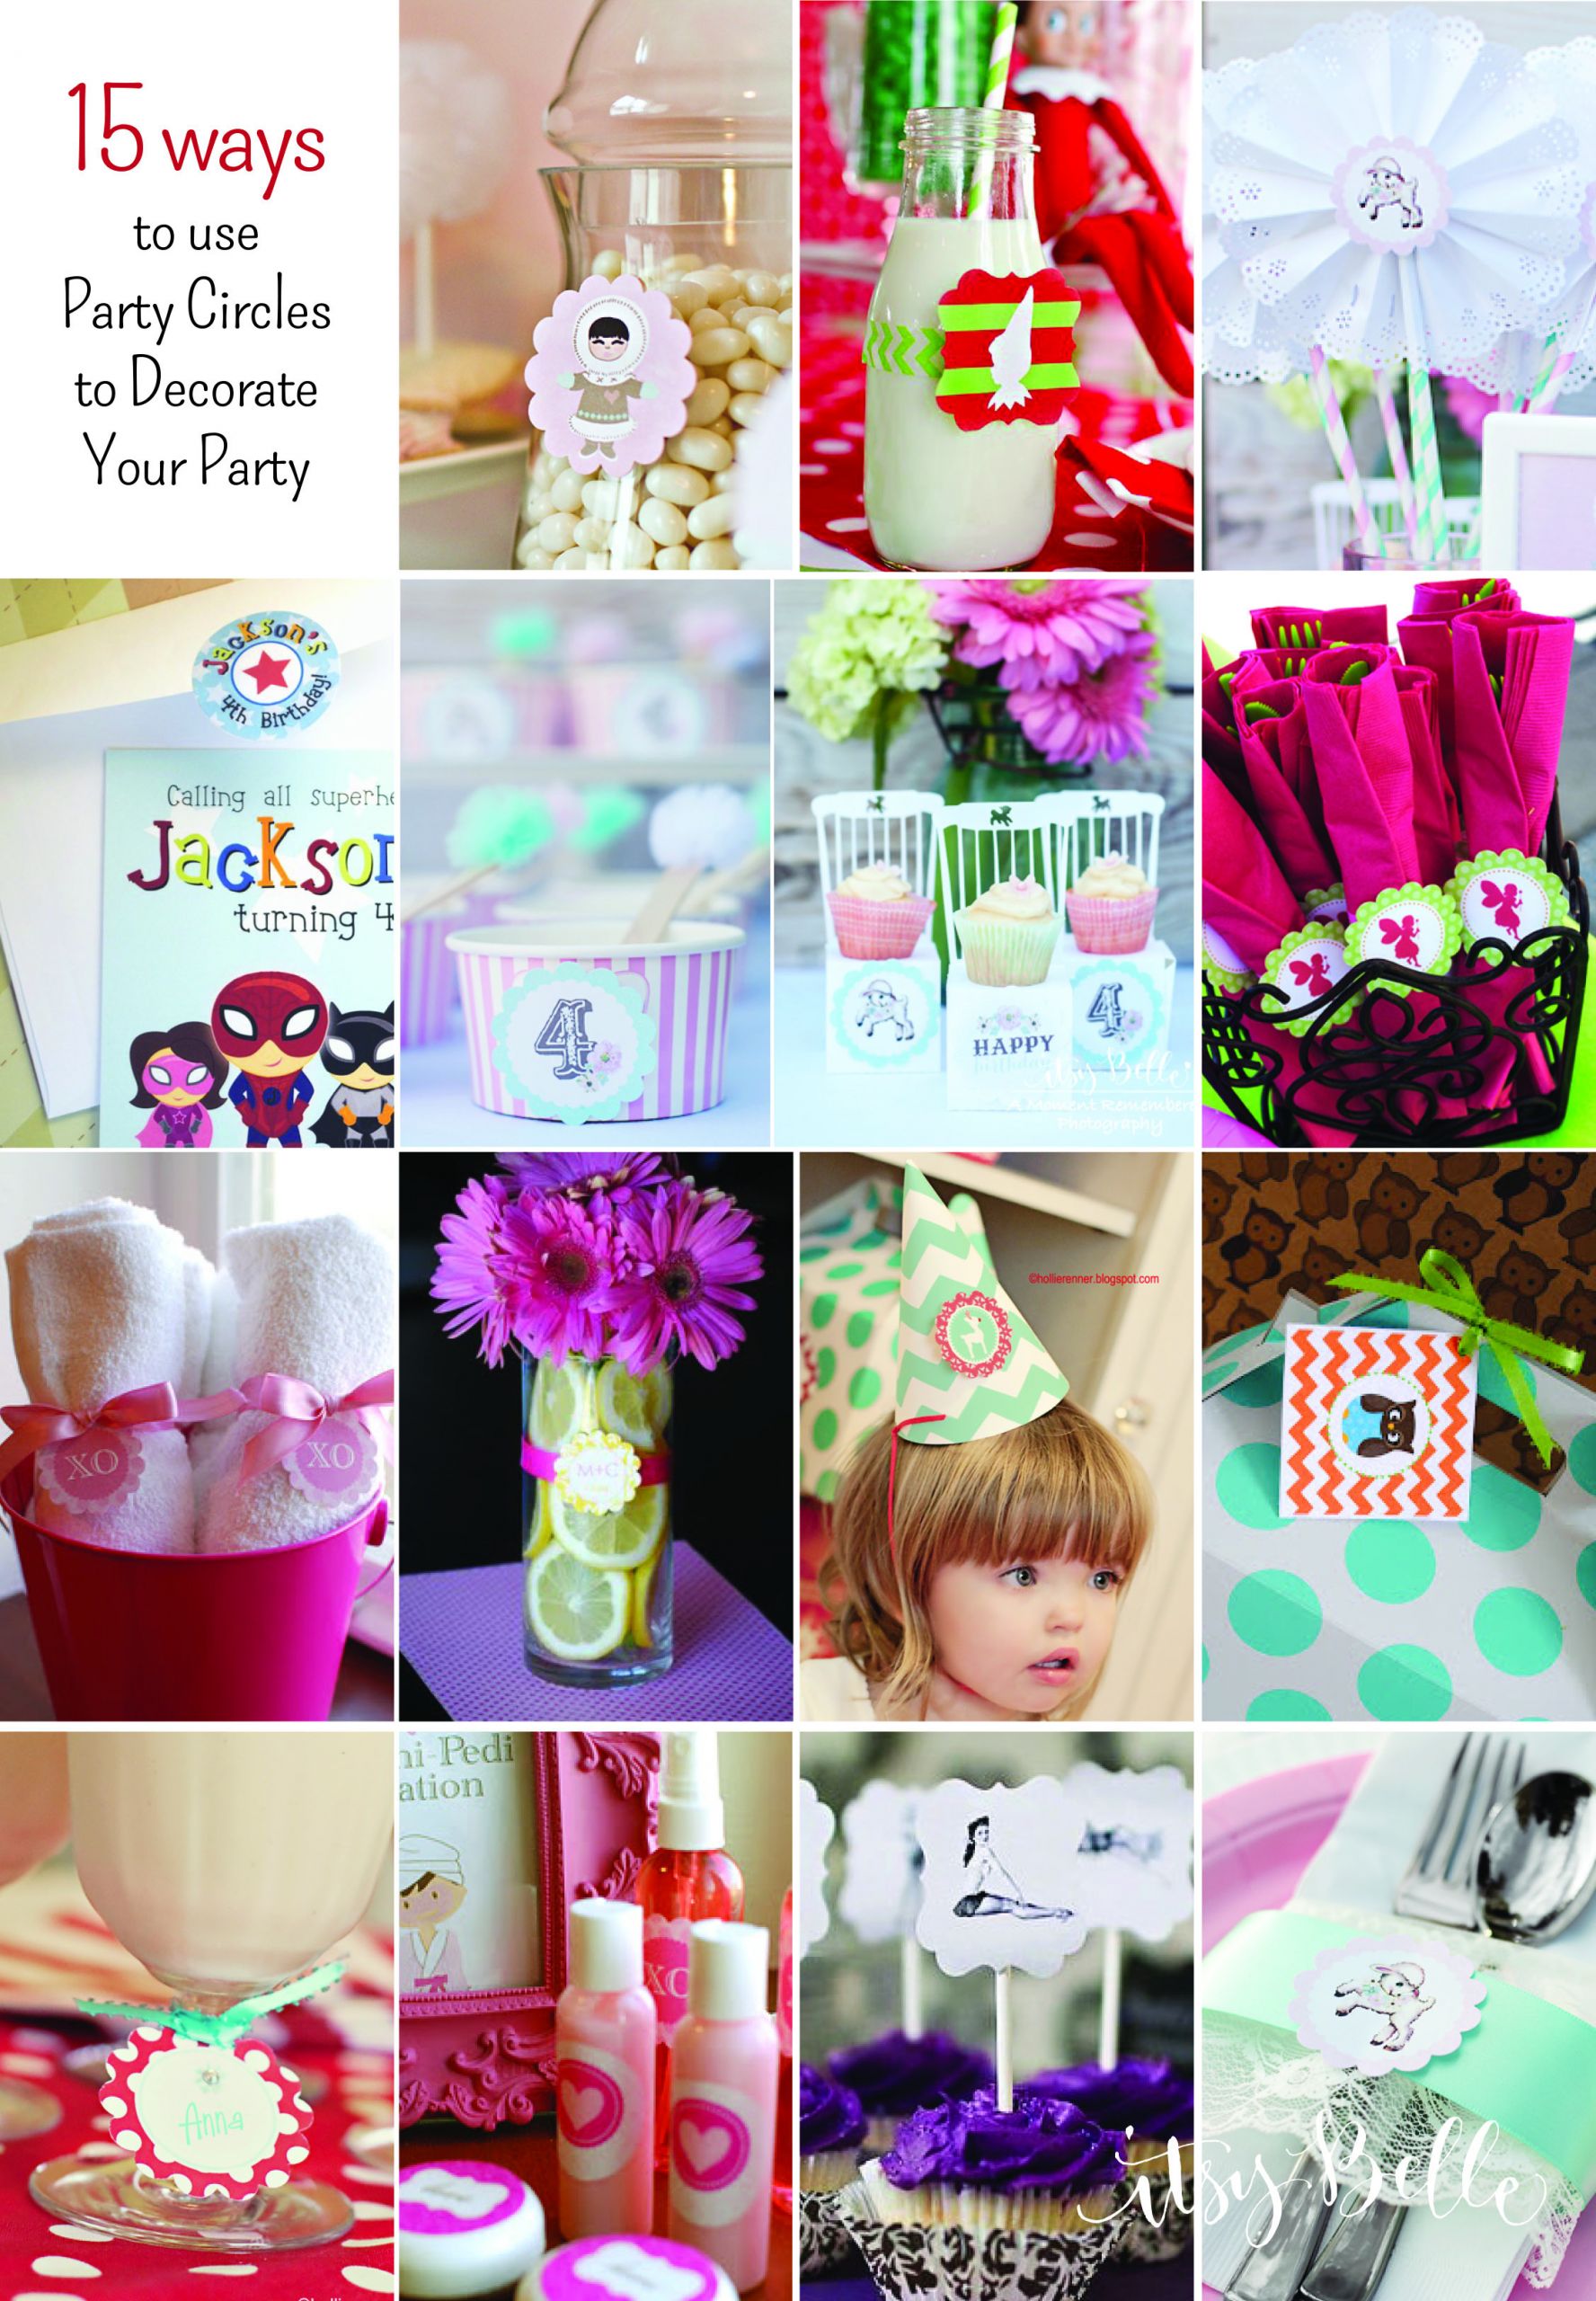 Diy Birthday Party Decorations
 DIY Party on a Bud 15 Ideas for Using Party Circles